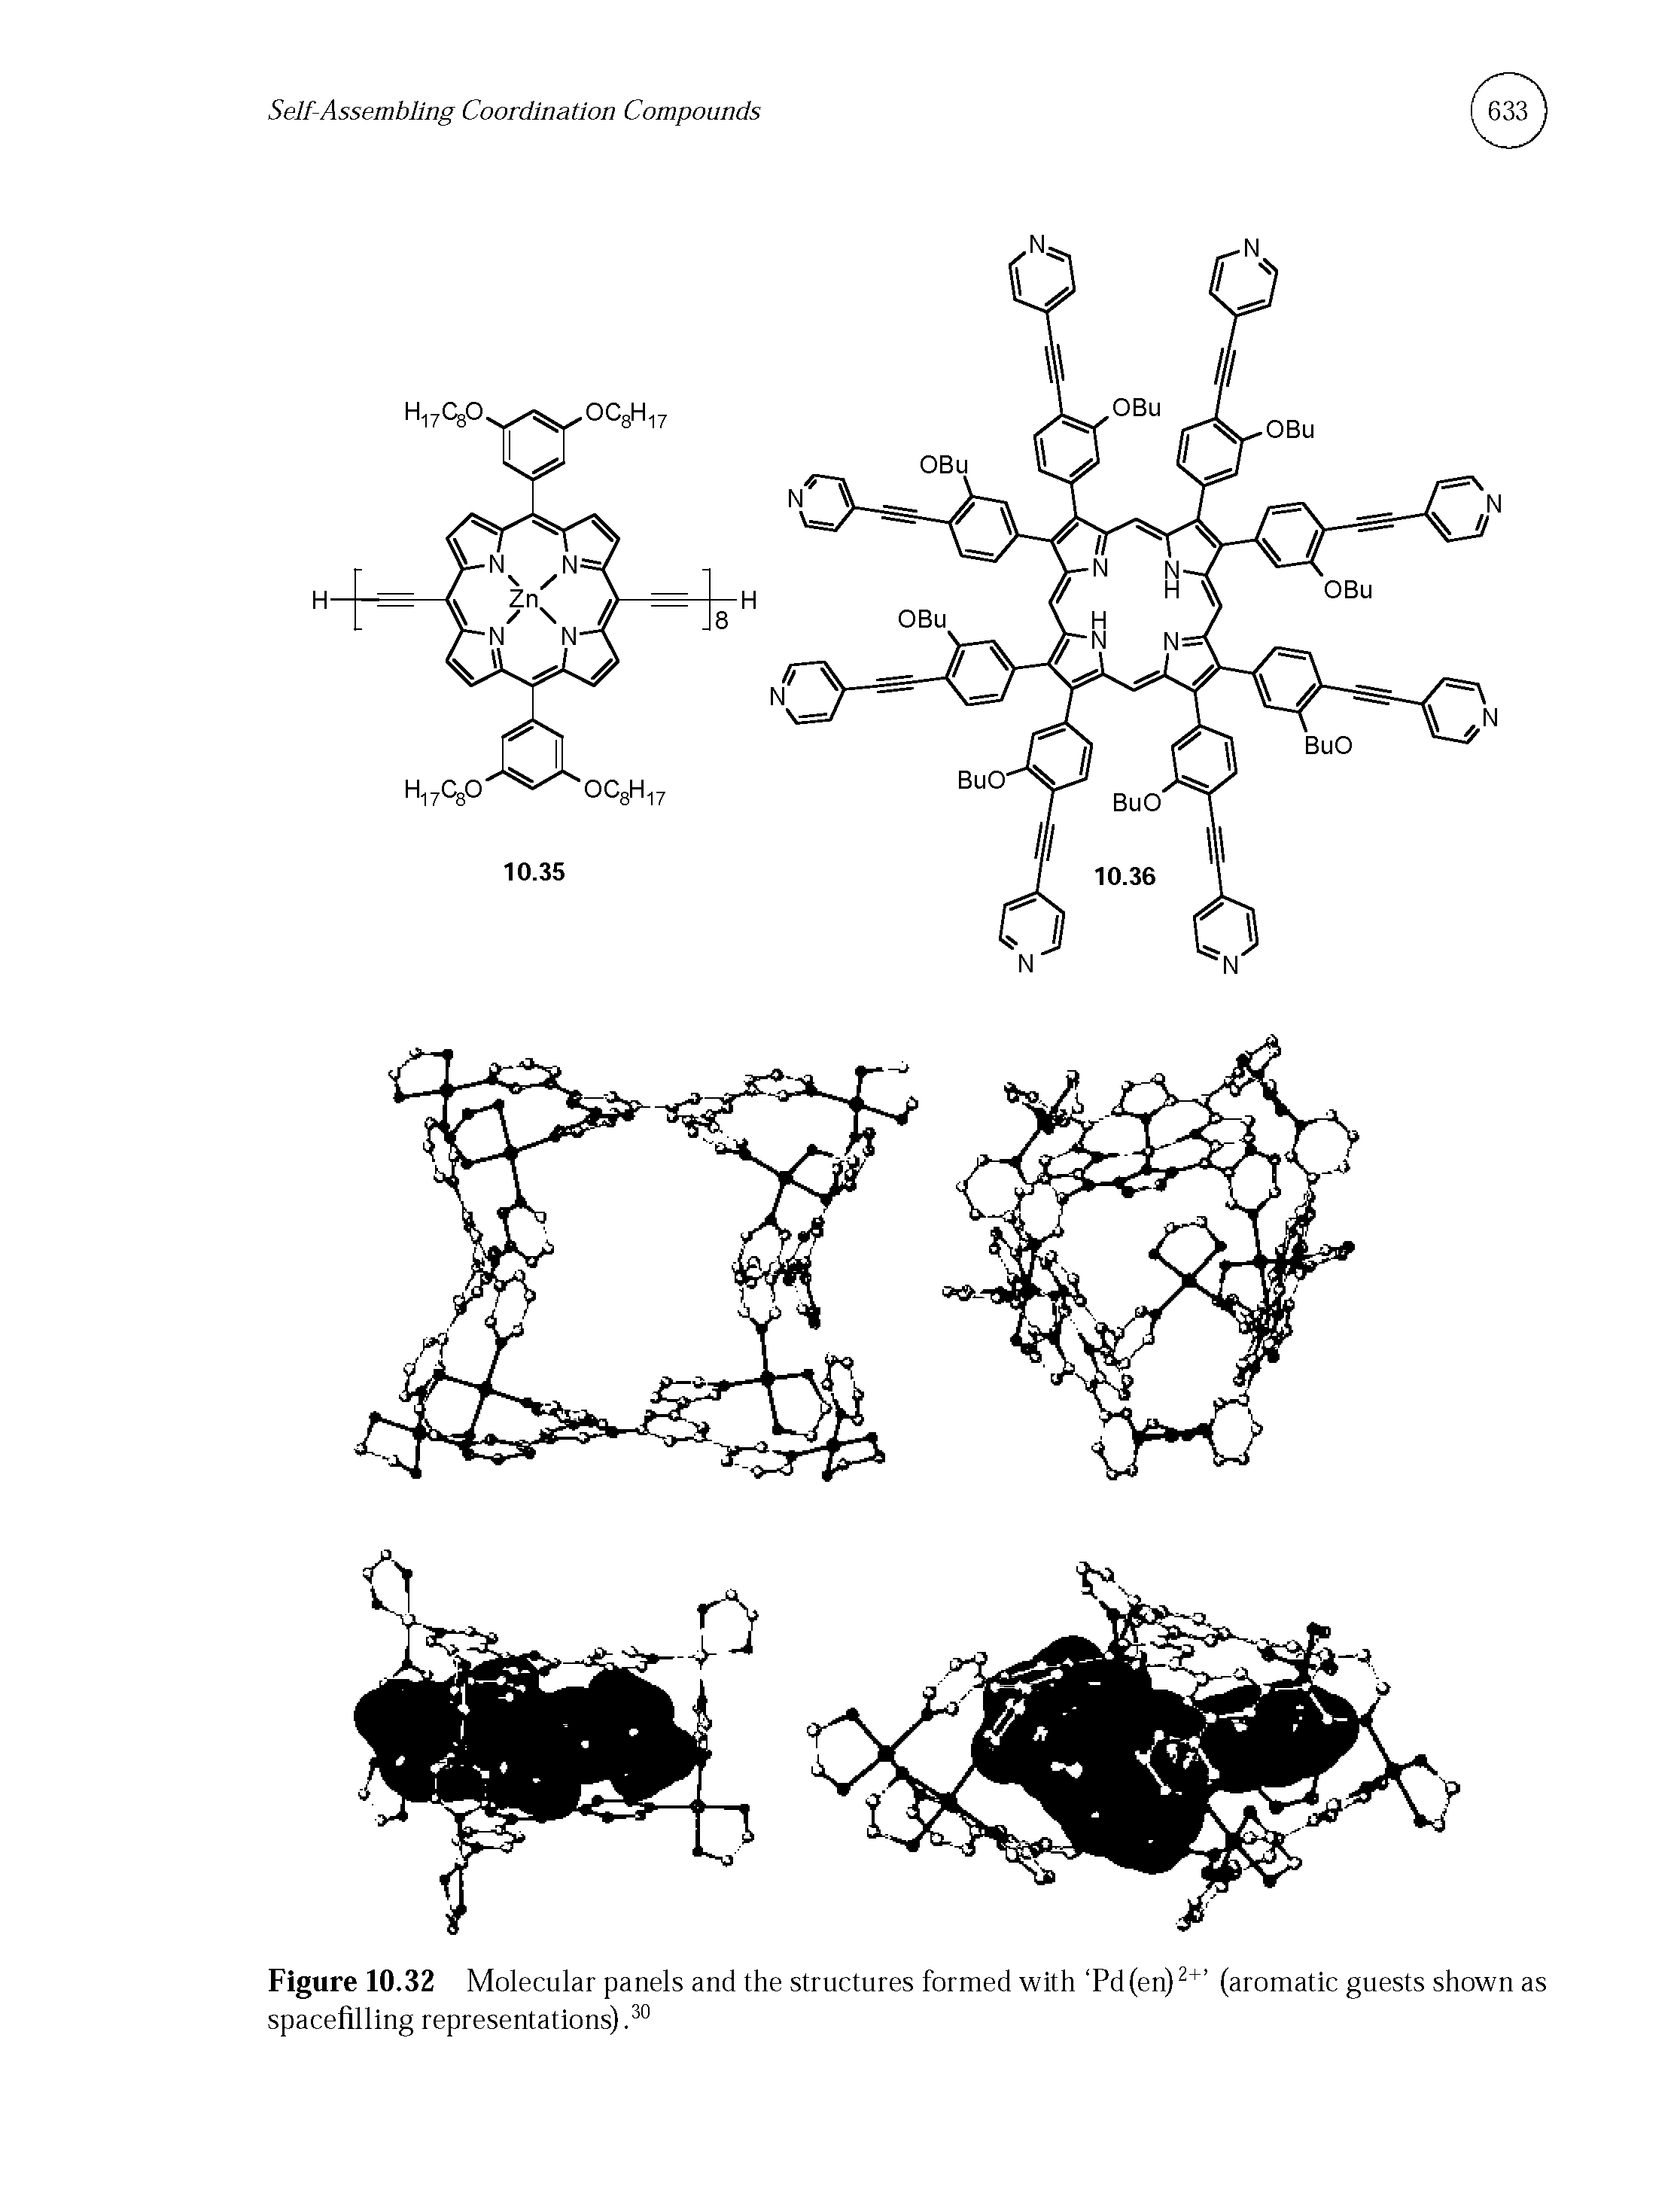 Figure 10.32 Molecular panels and the structures formed with Pd(en)2+ (aromatic guests shown as spacefilling representations).30...